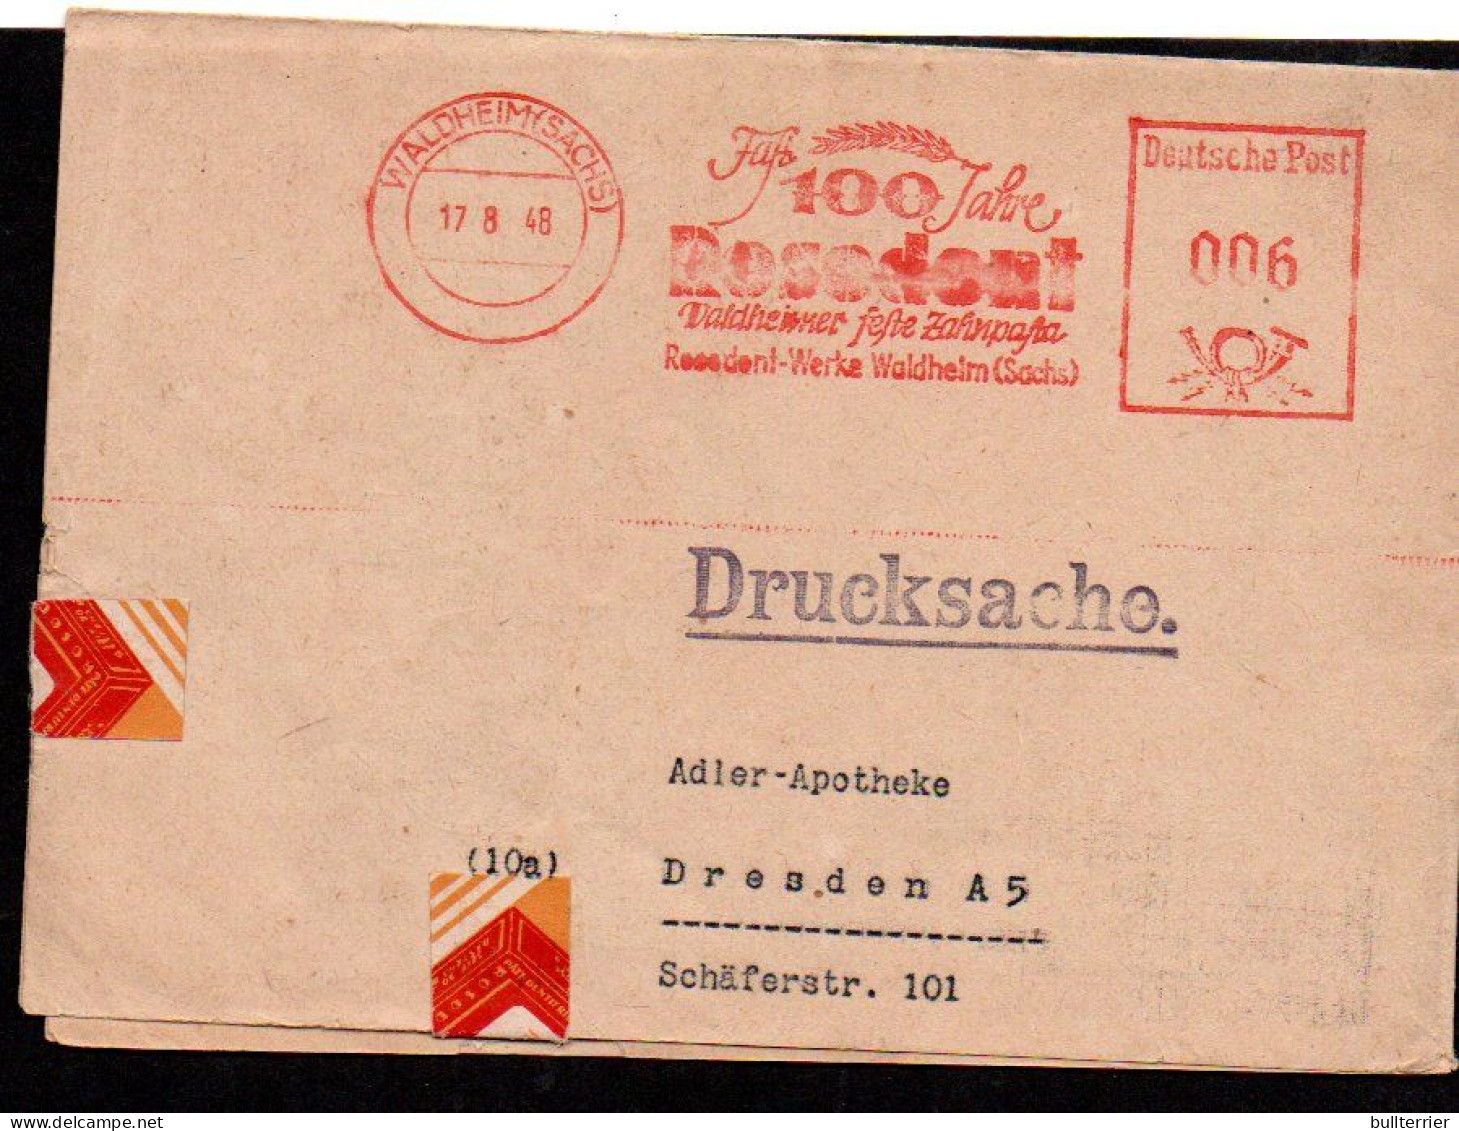 DENISTRY -  GERMANY - 1948 - COVER WALDHEIM TO DRESDEN WITH SLOGAN CANCELLATION - Geneeskunde